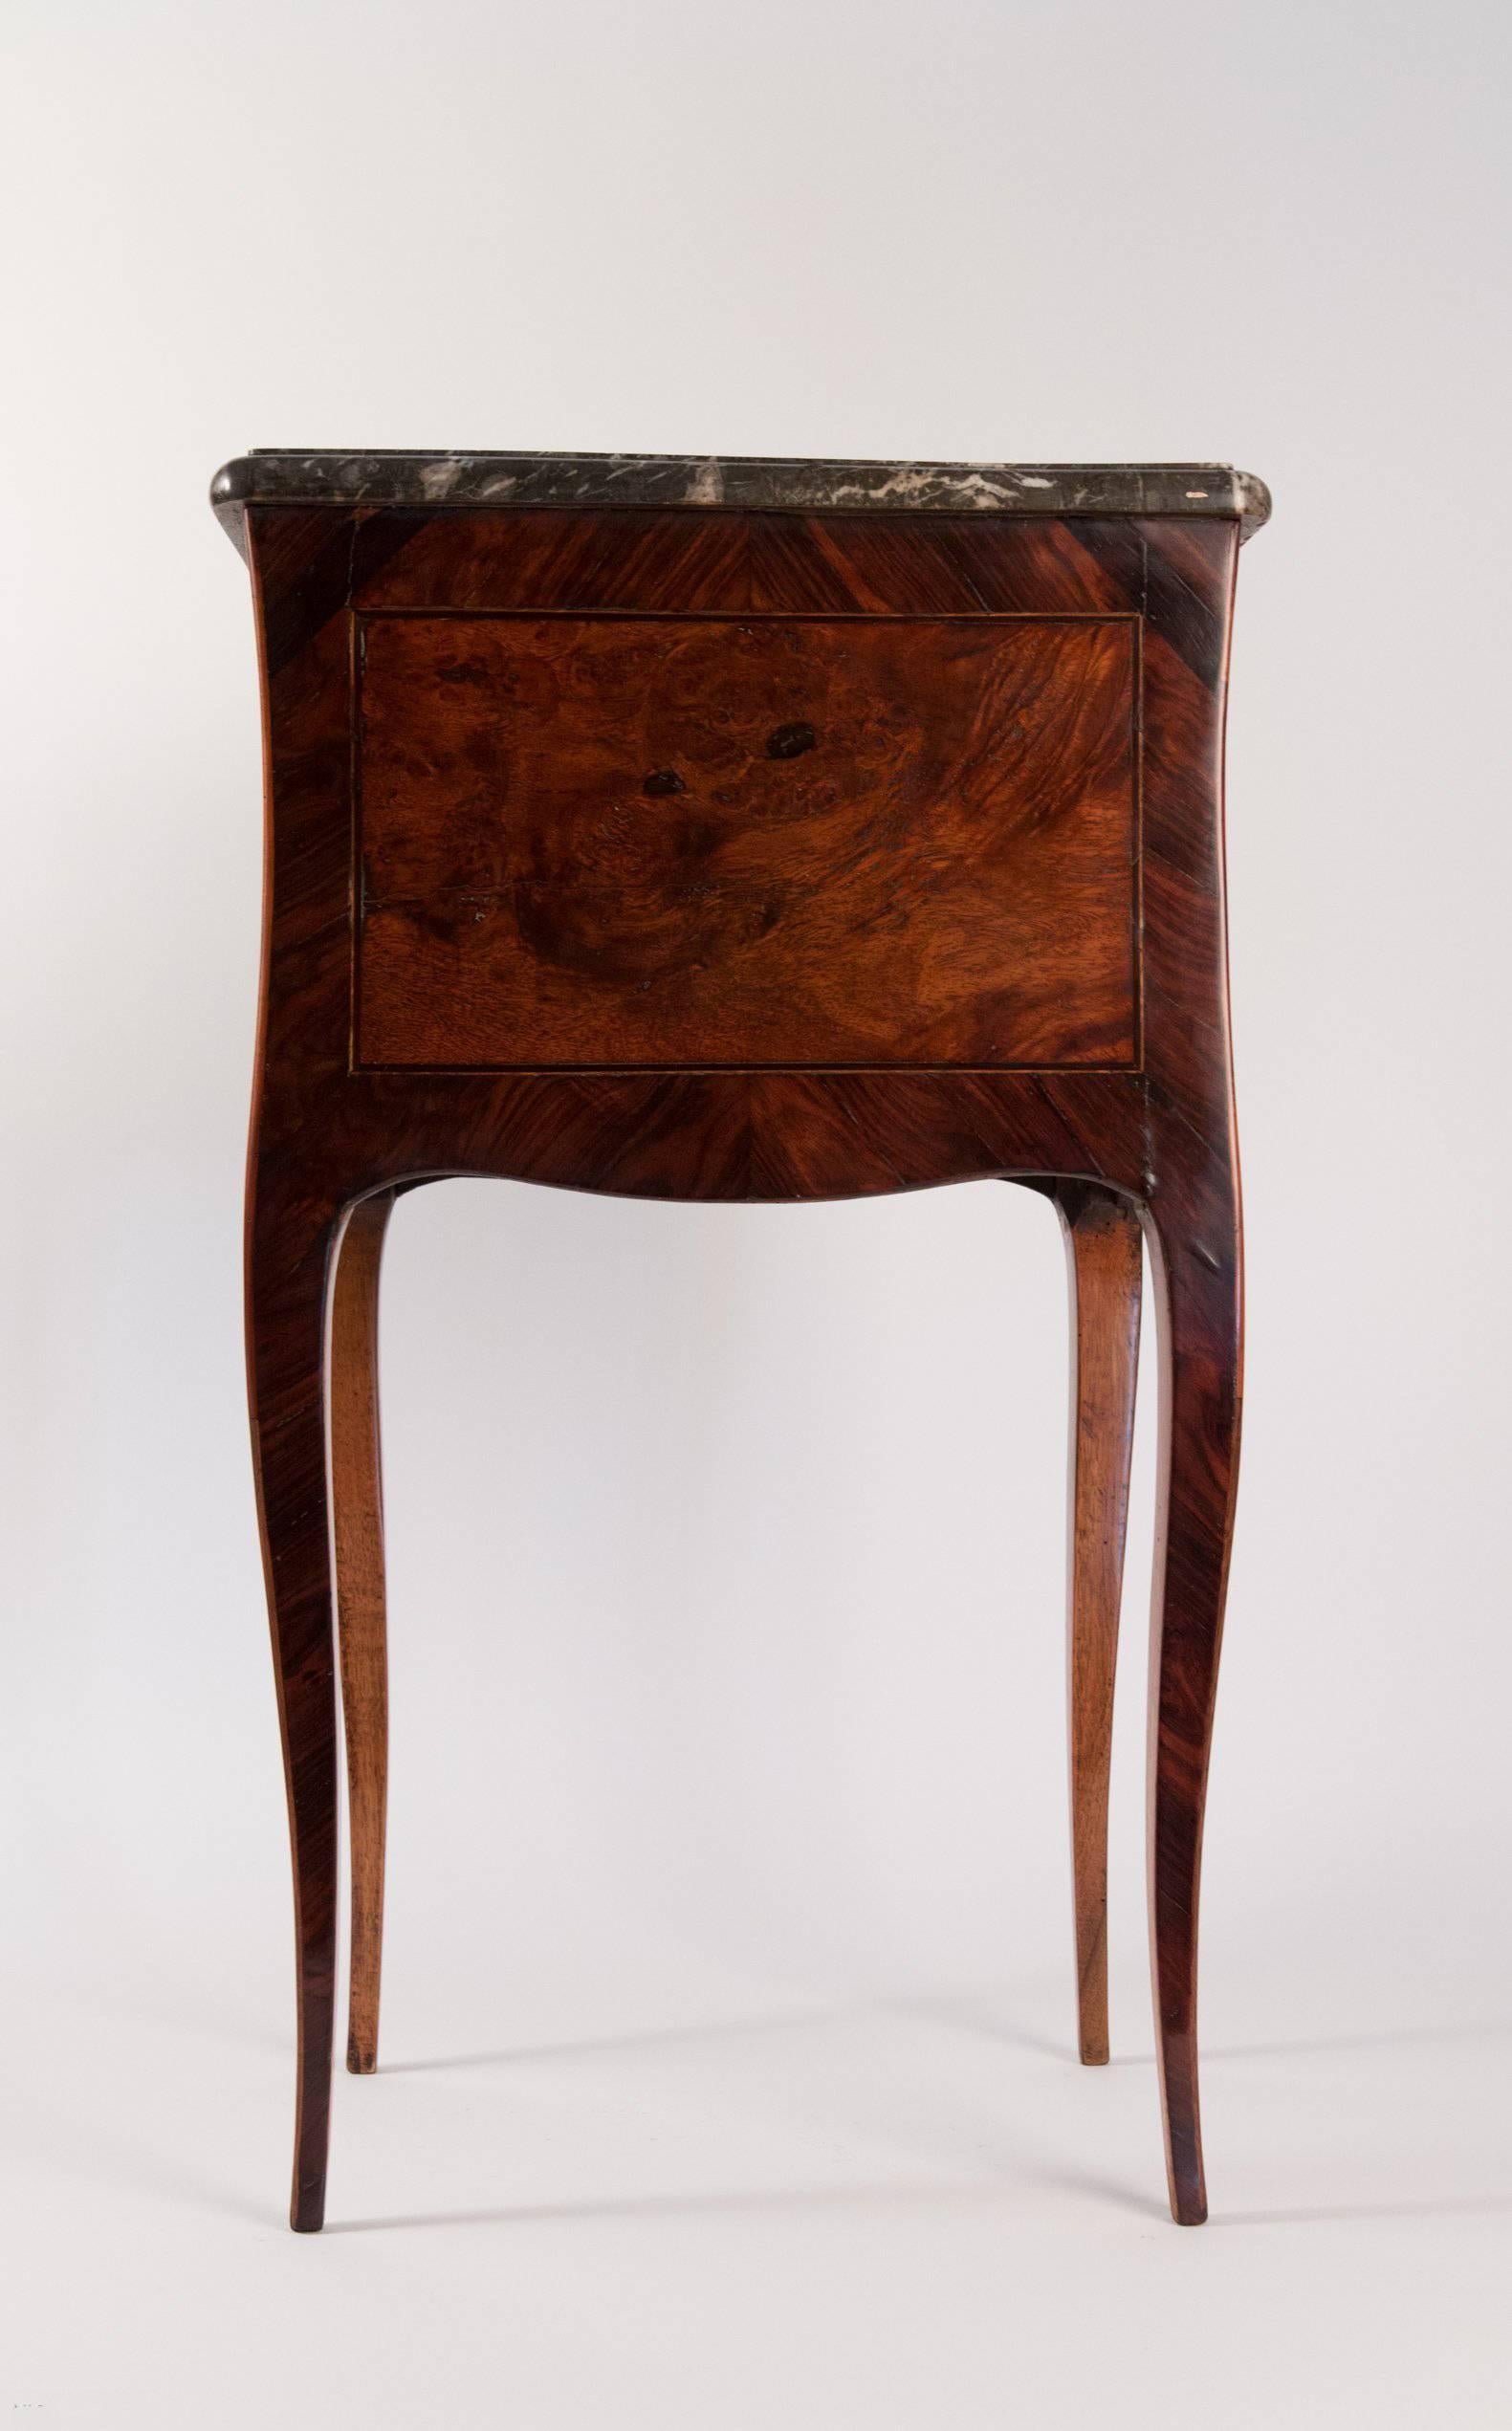 An lovely and fine quality small Louis XV style, Fruitwood, kingwood and Amboyna commode with two drawers and elegant cabriole legs, called a 